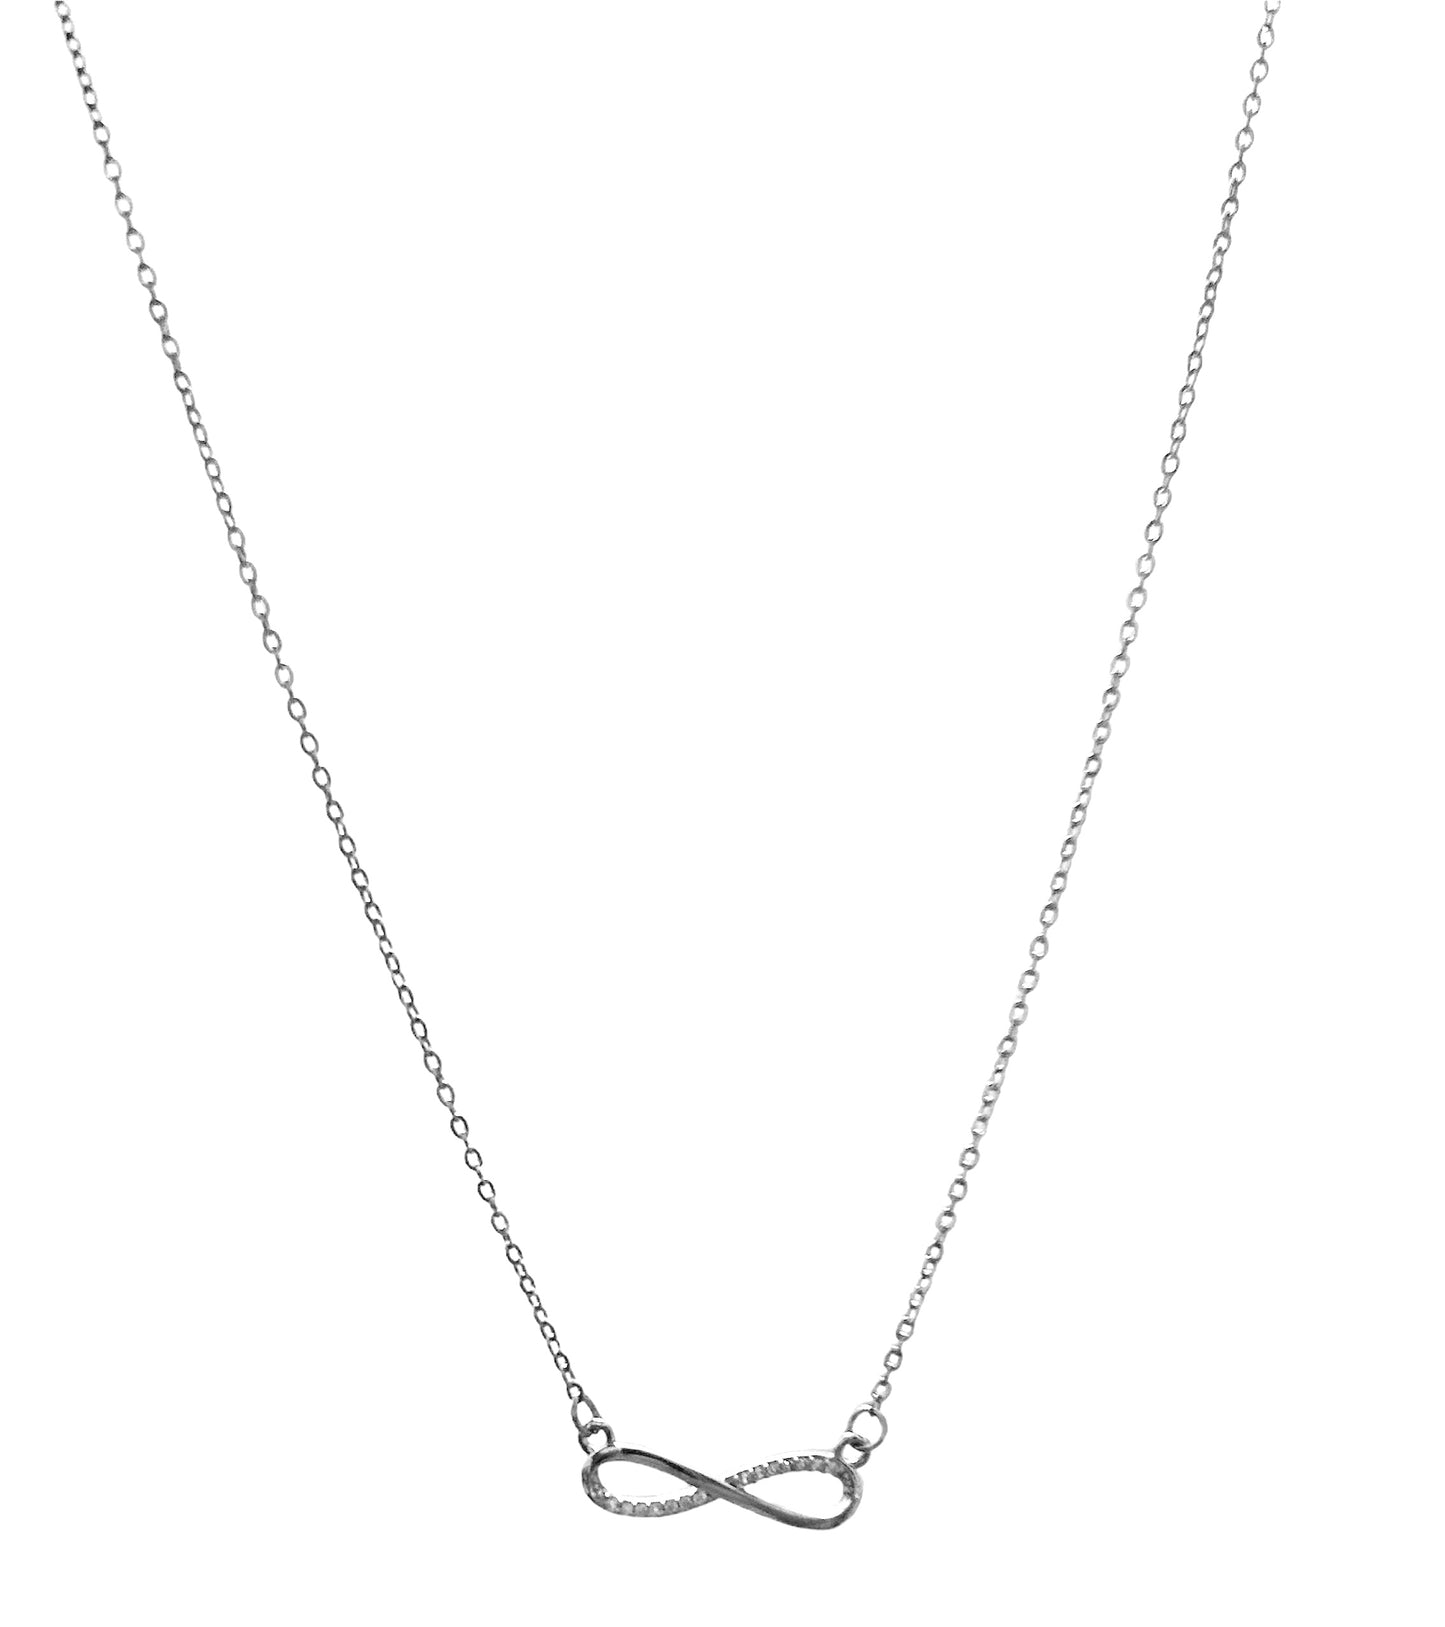 Infinity 3.0 necklace